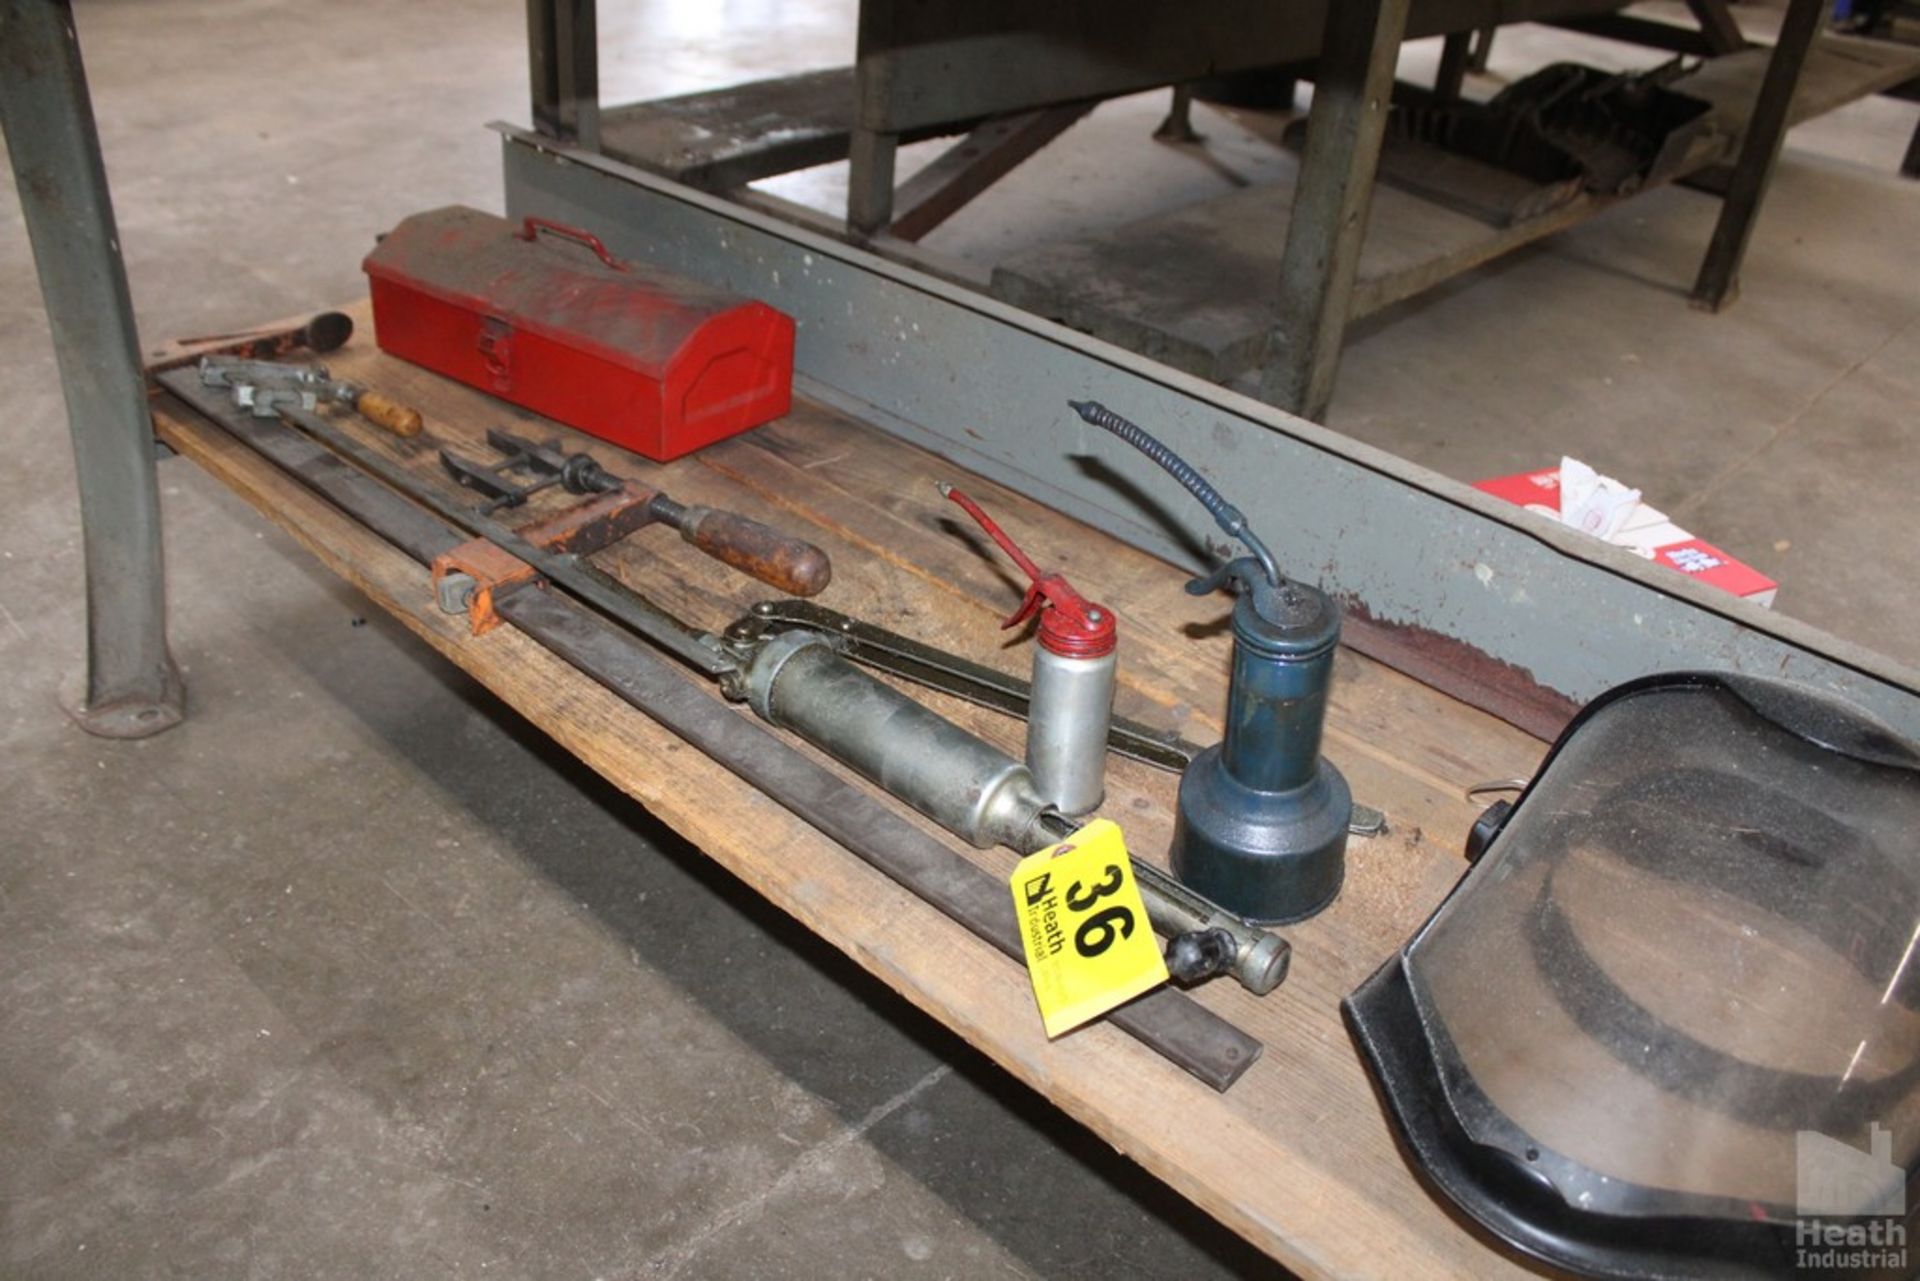 CLAMPS, GREASE GUN, TOOL BOX, OIL CANS AND FACE SHIELD